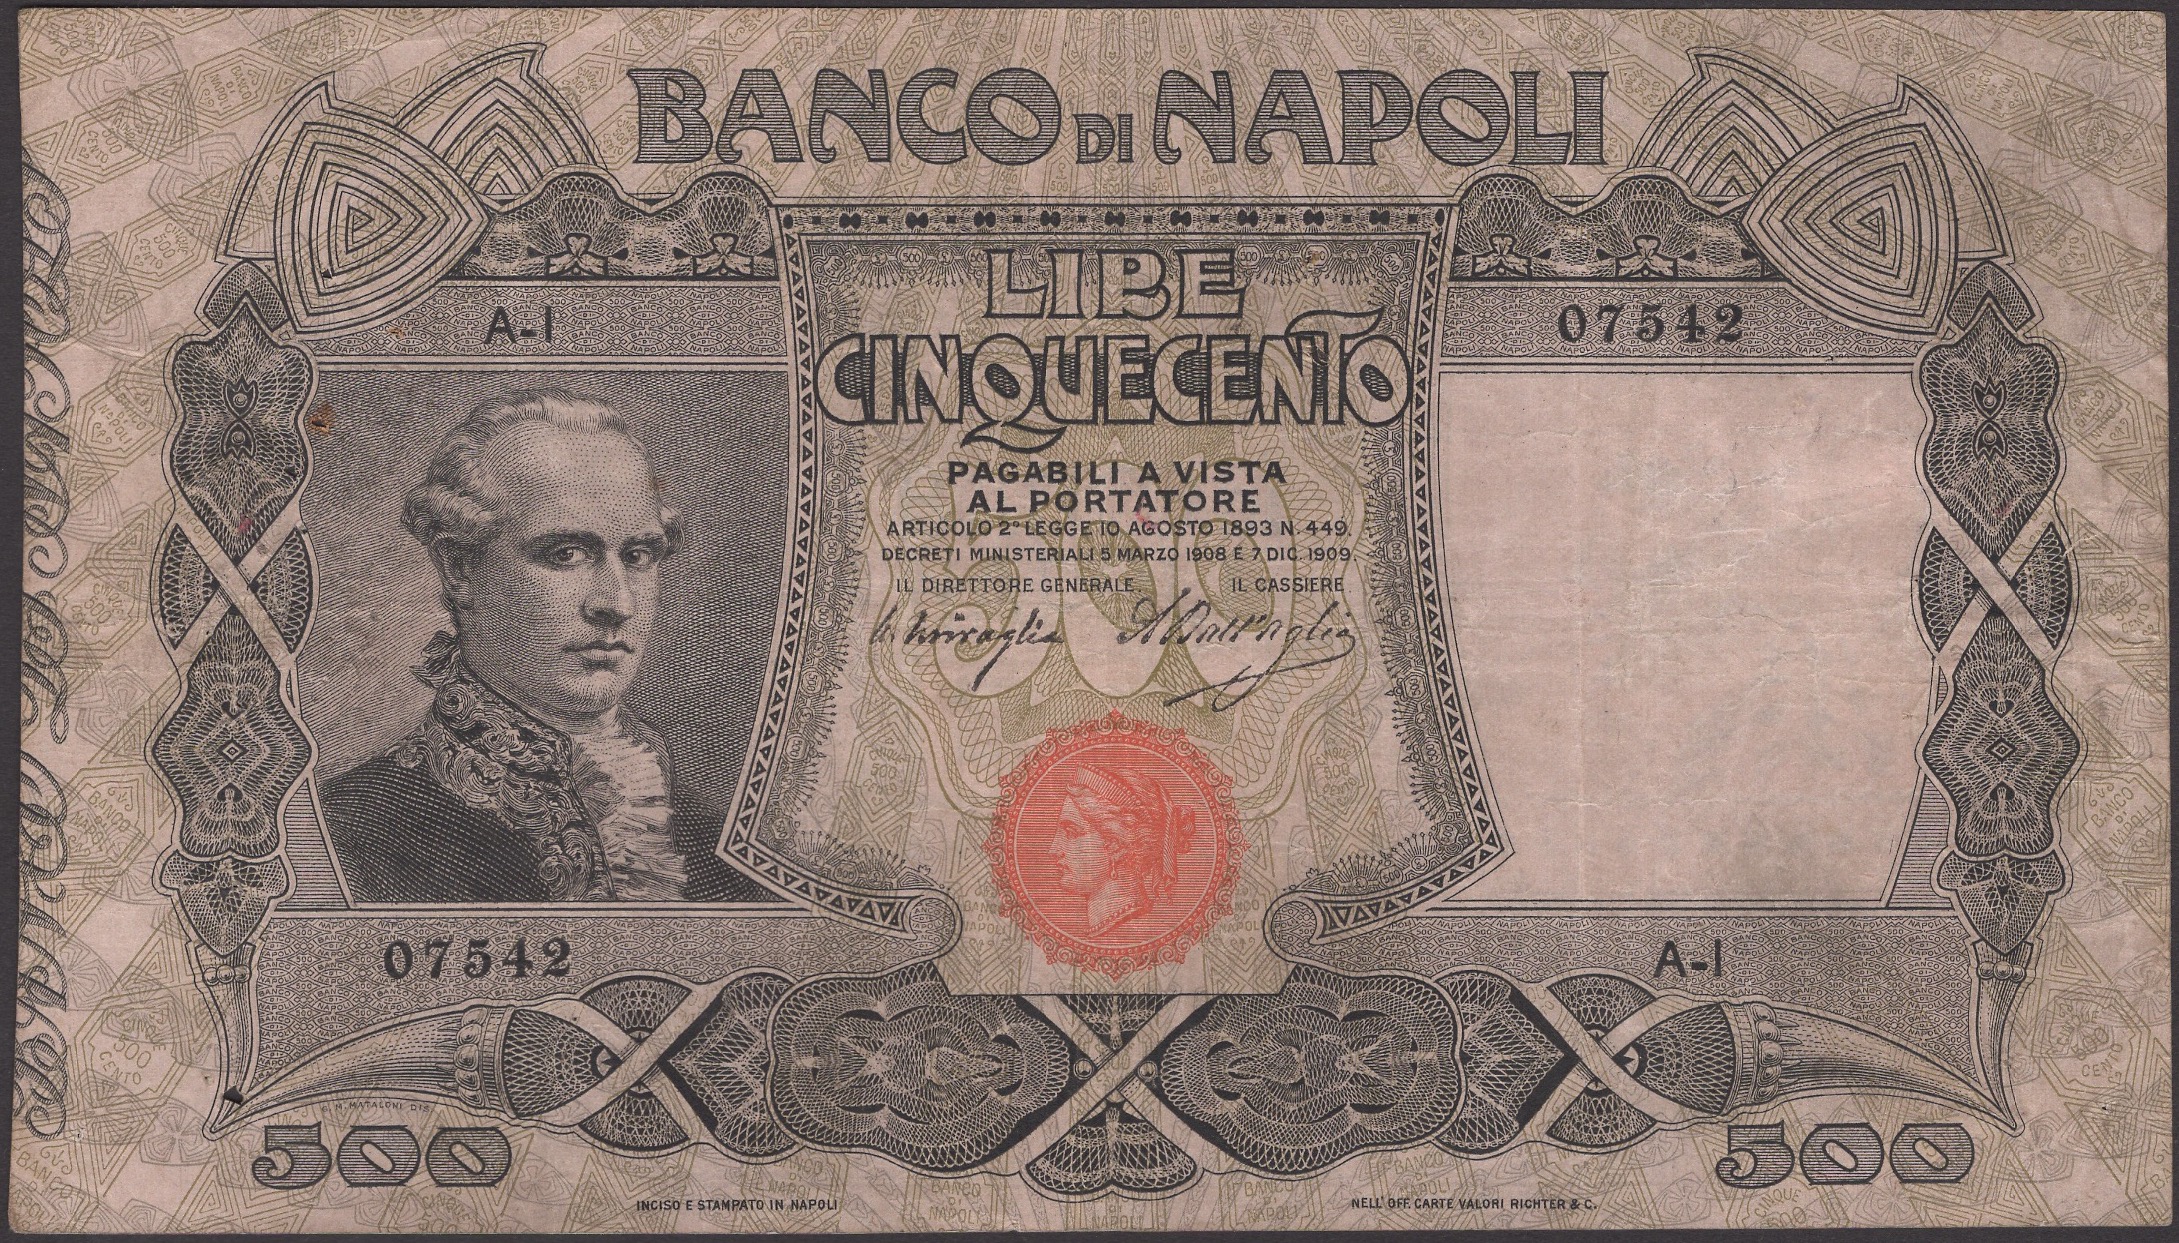 Banco di Napoli, 50 Lire, 15 July 1896, serial number A-1 07542, pinholes and minor...